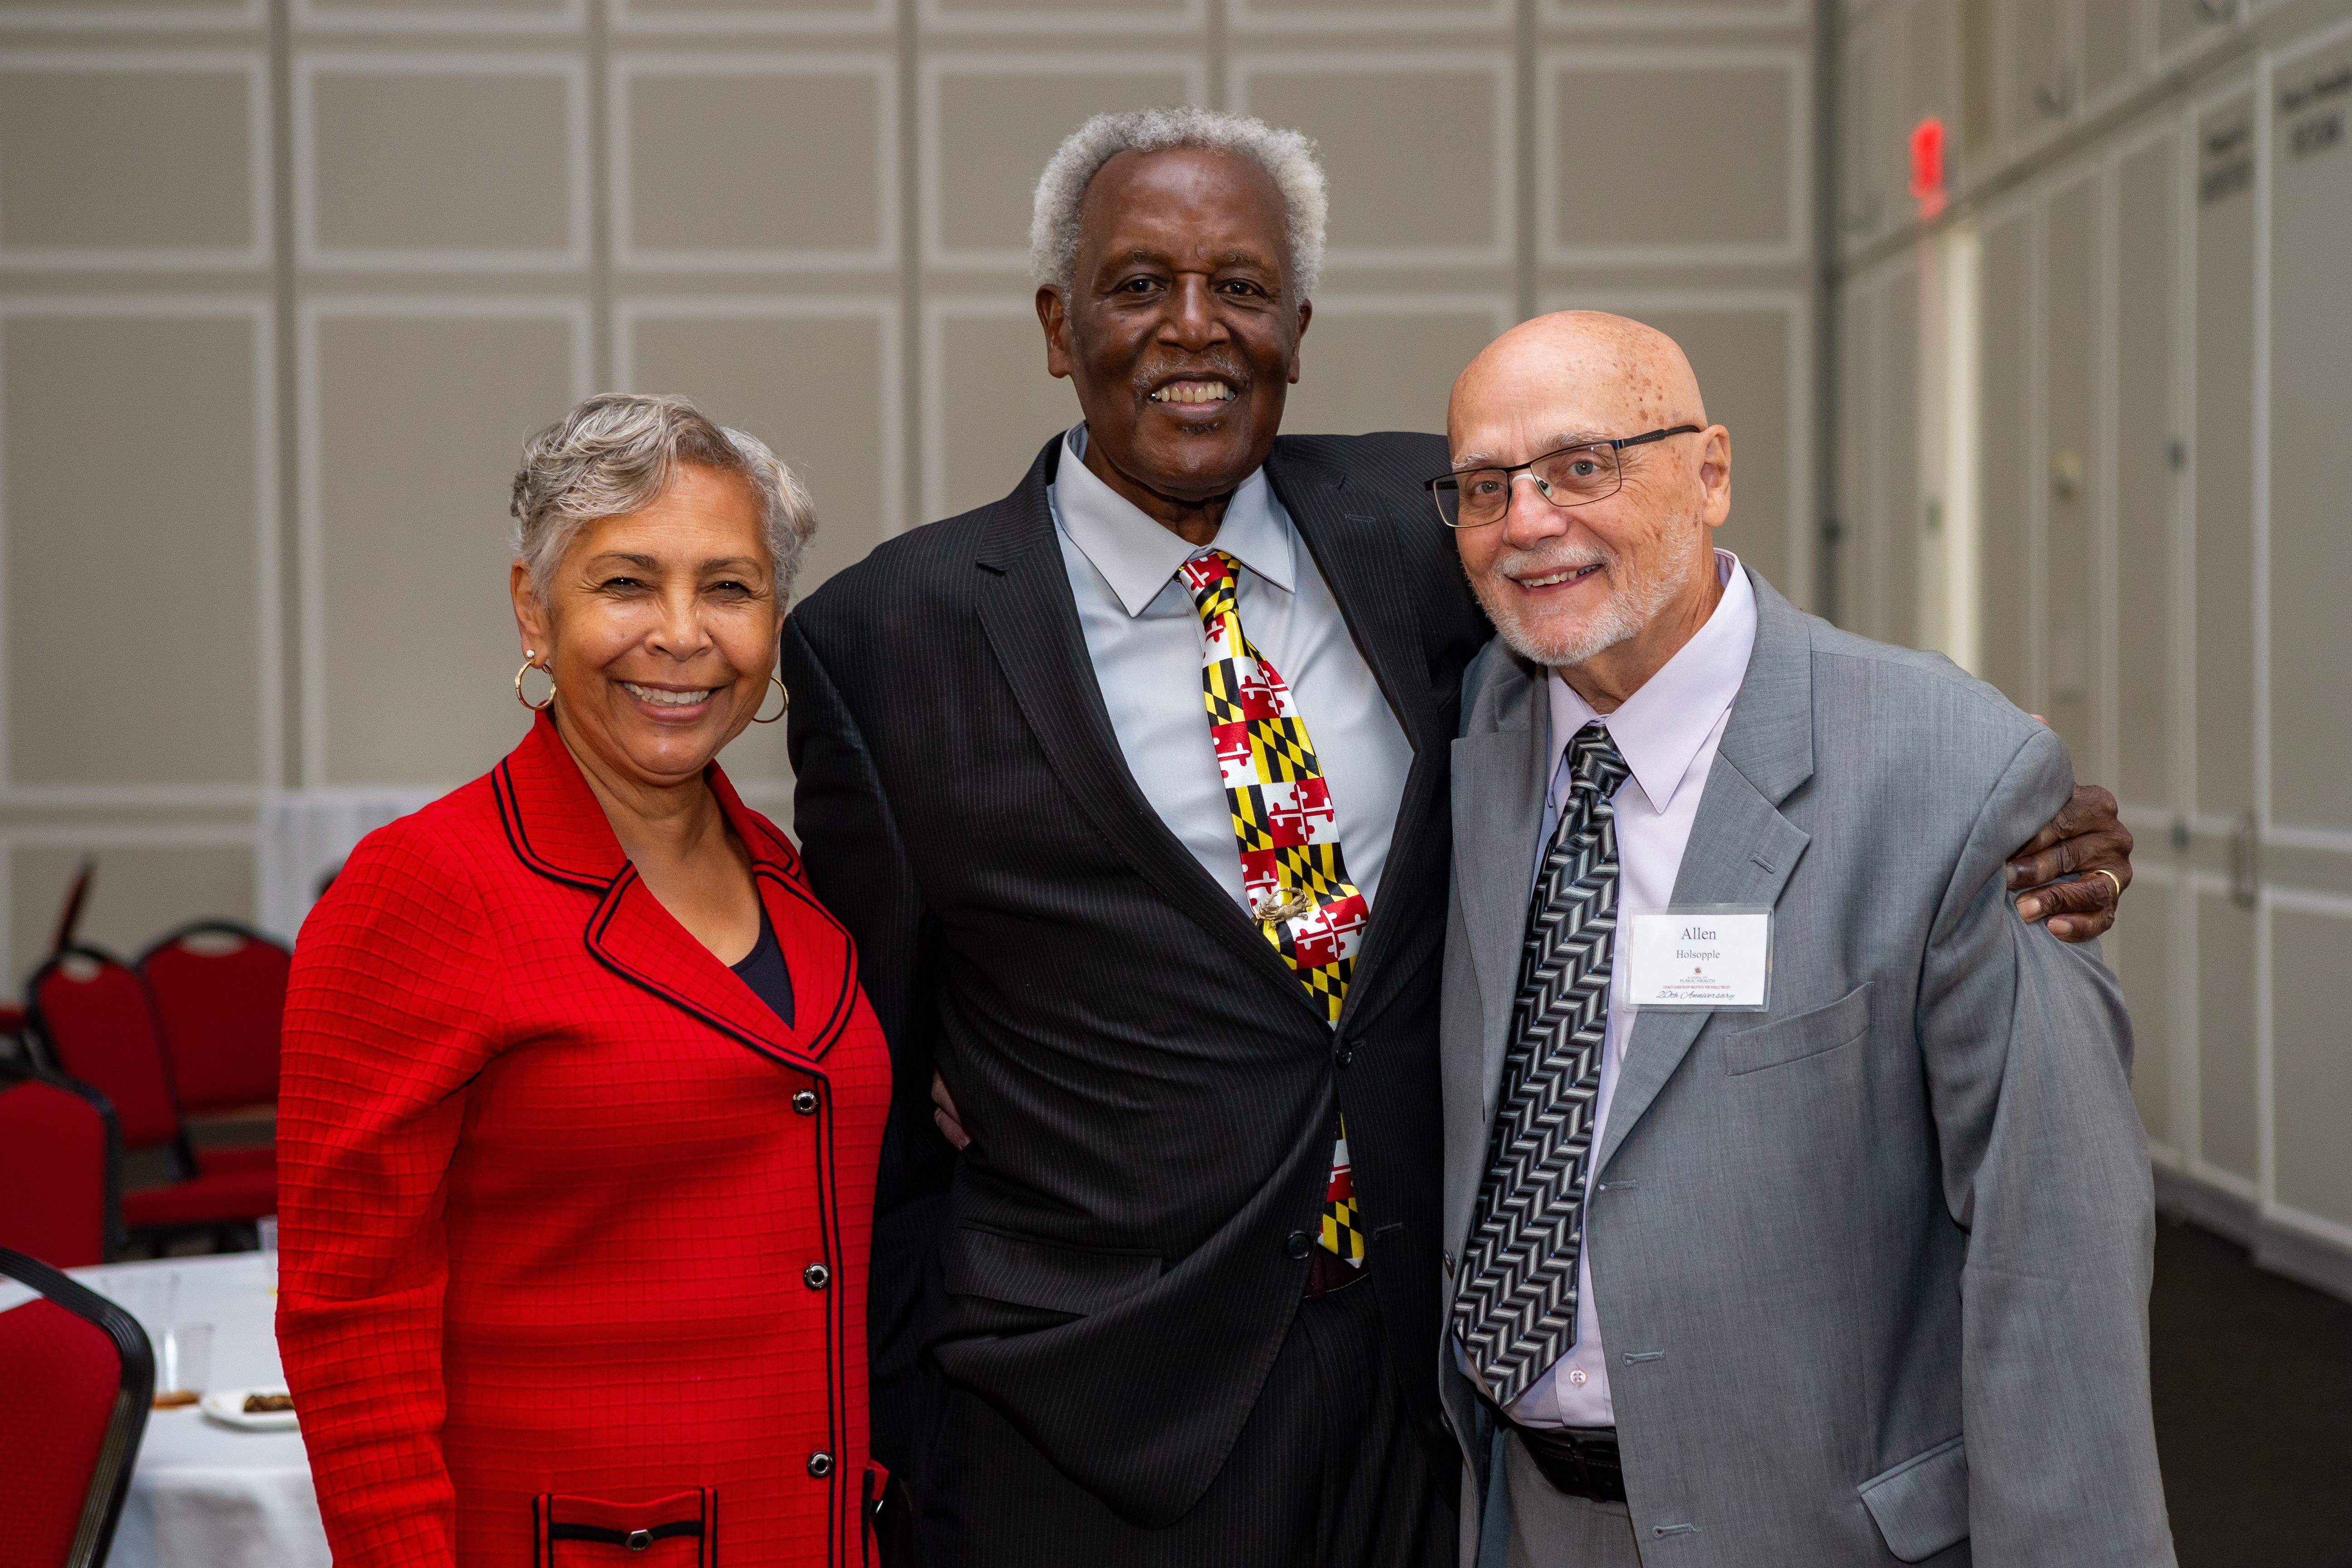 Renee Smoot, an LLIPP alumna, Wesley Queen and a man wearing glasses celebrate the 20th anniversary of the Legacy Leadership Institute for Public Policy 